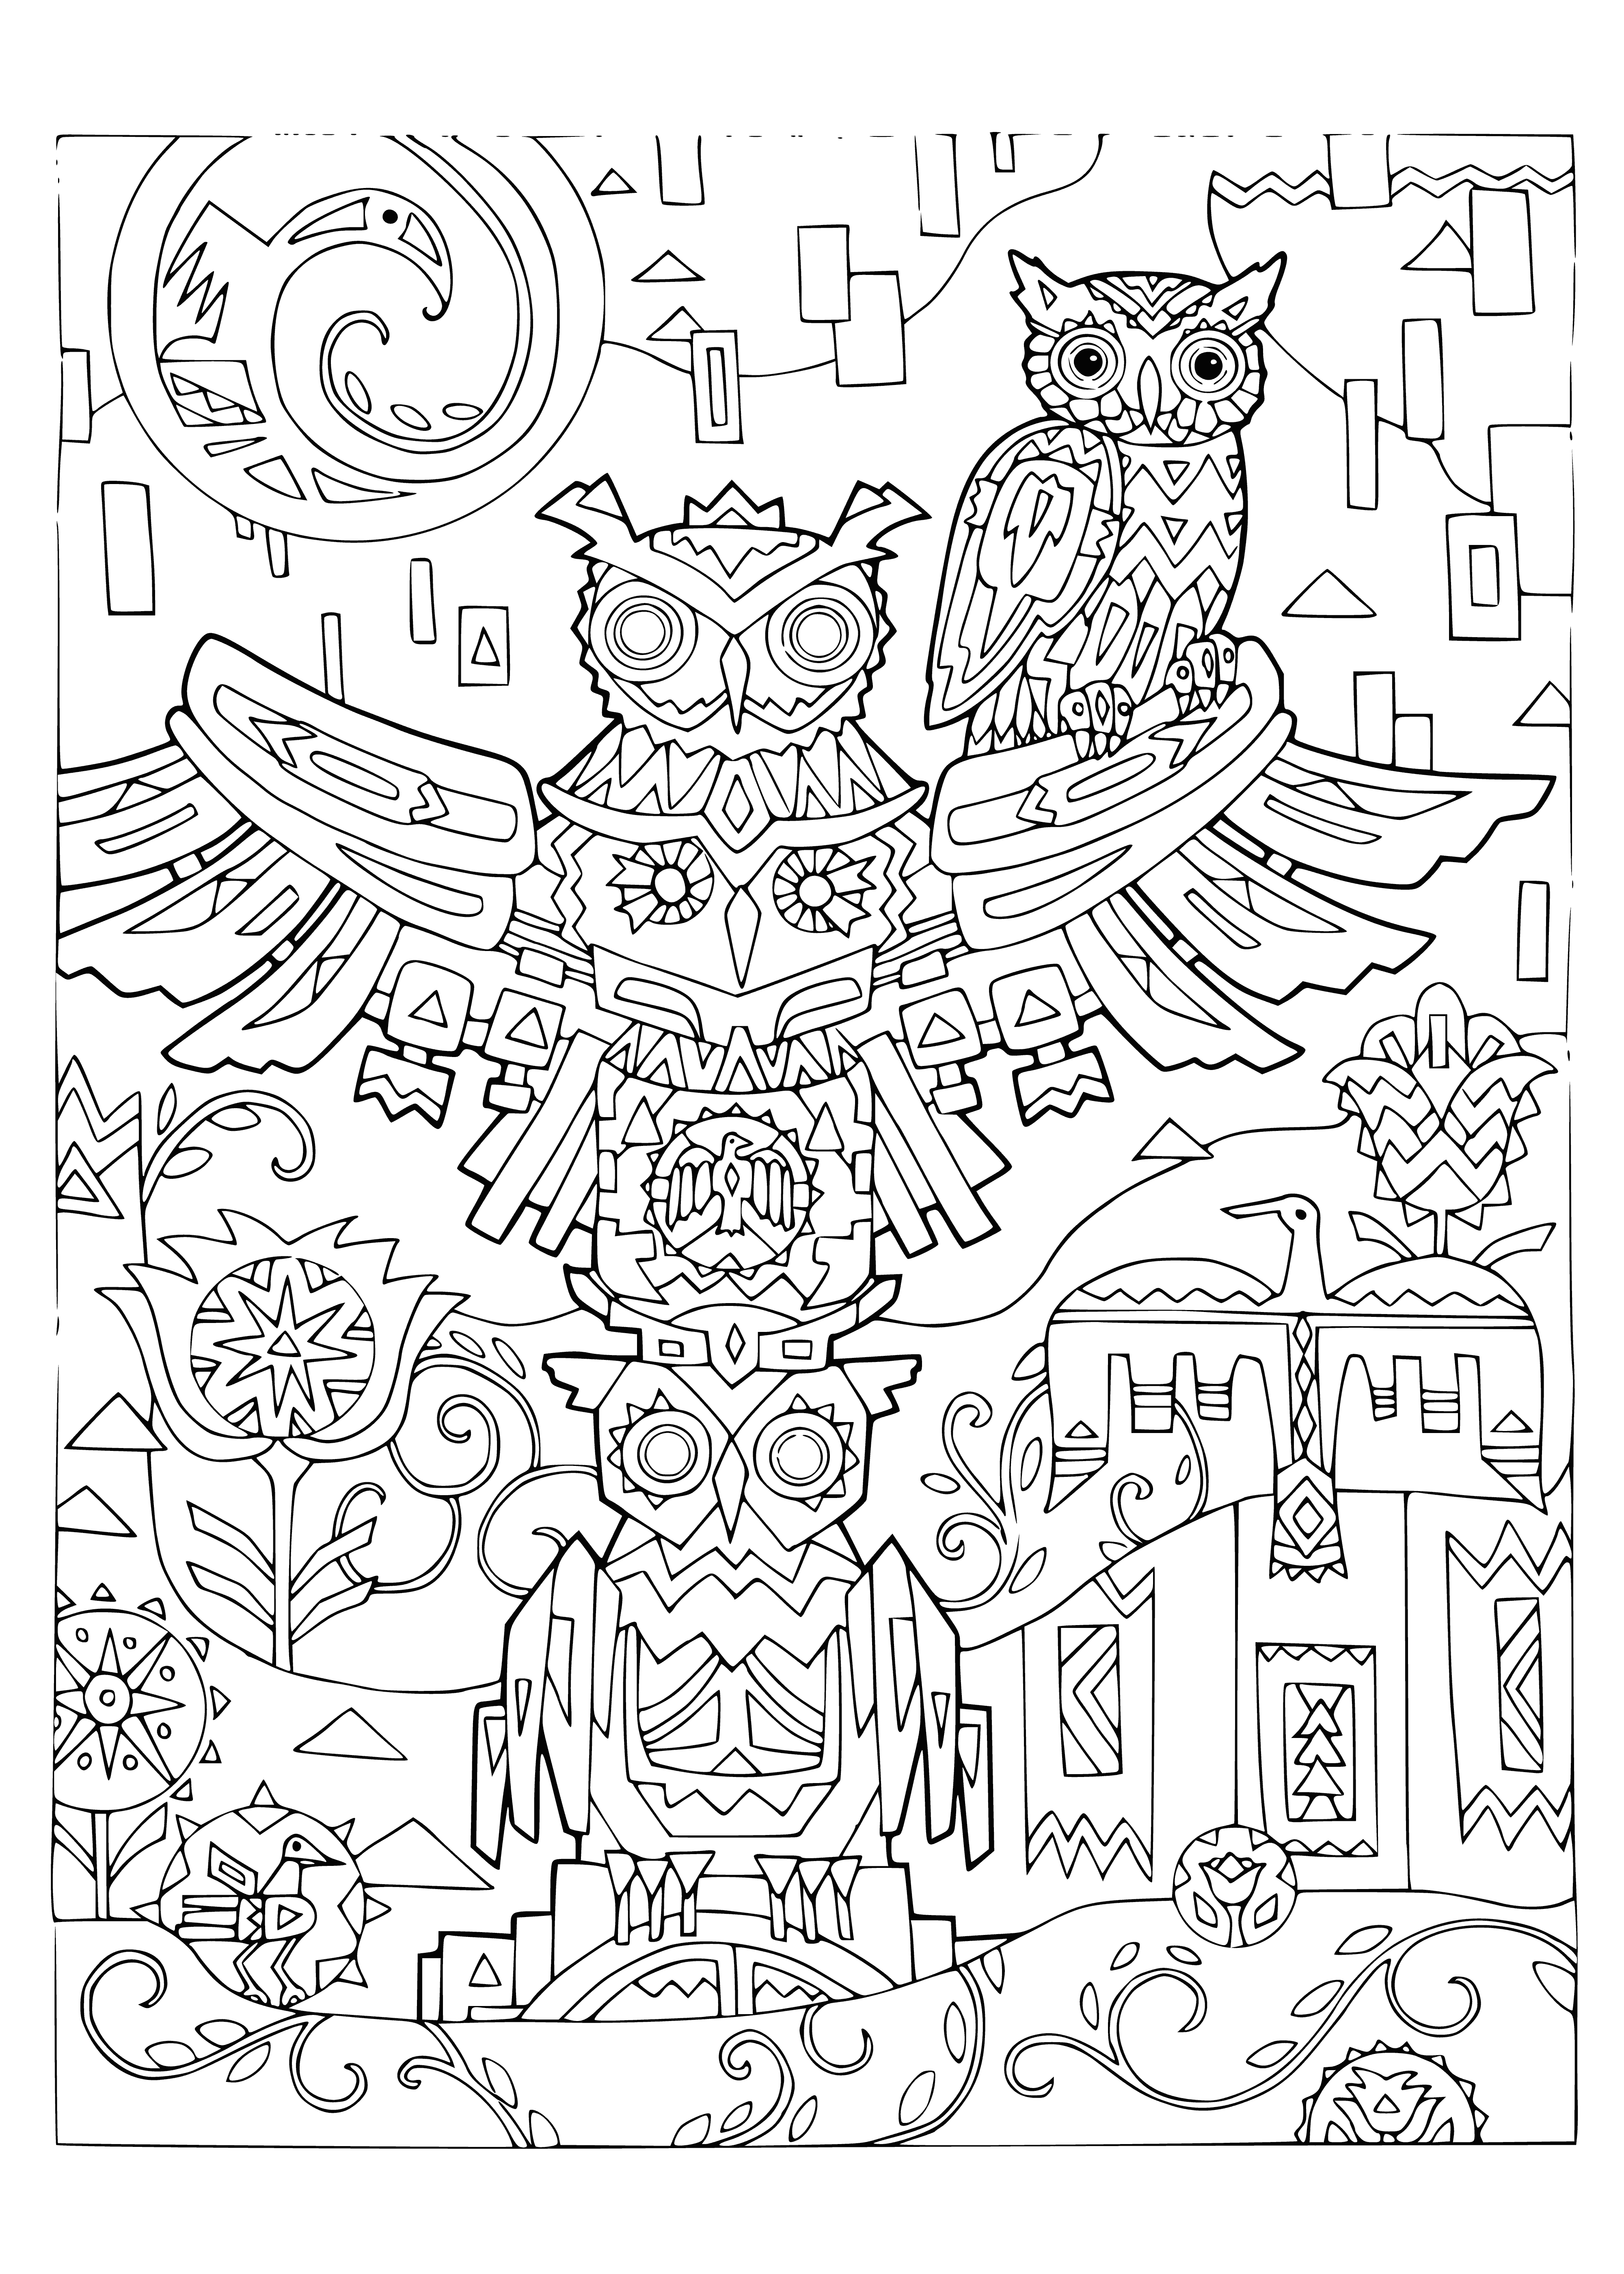 coloring page: Two owls, different sizes, staring off. Perched on a branch, swirls & patterns in background. Eyes bright & beaks small.